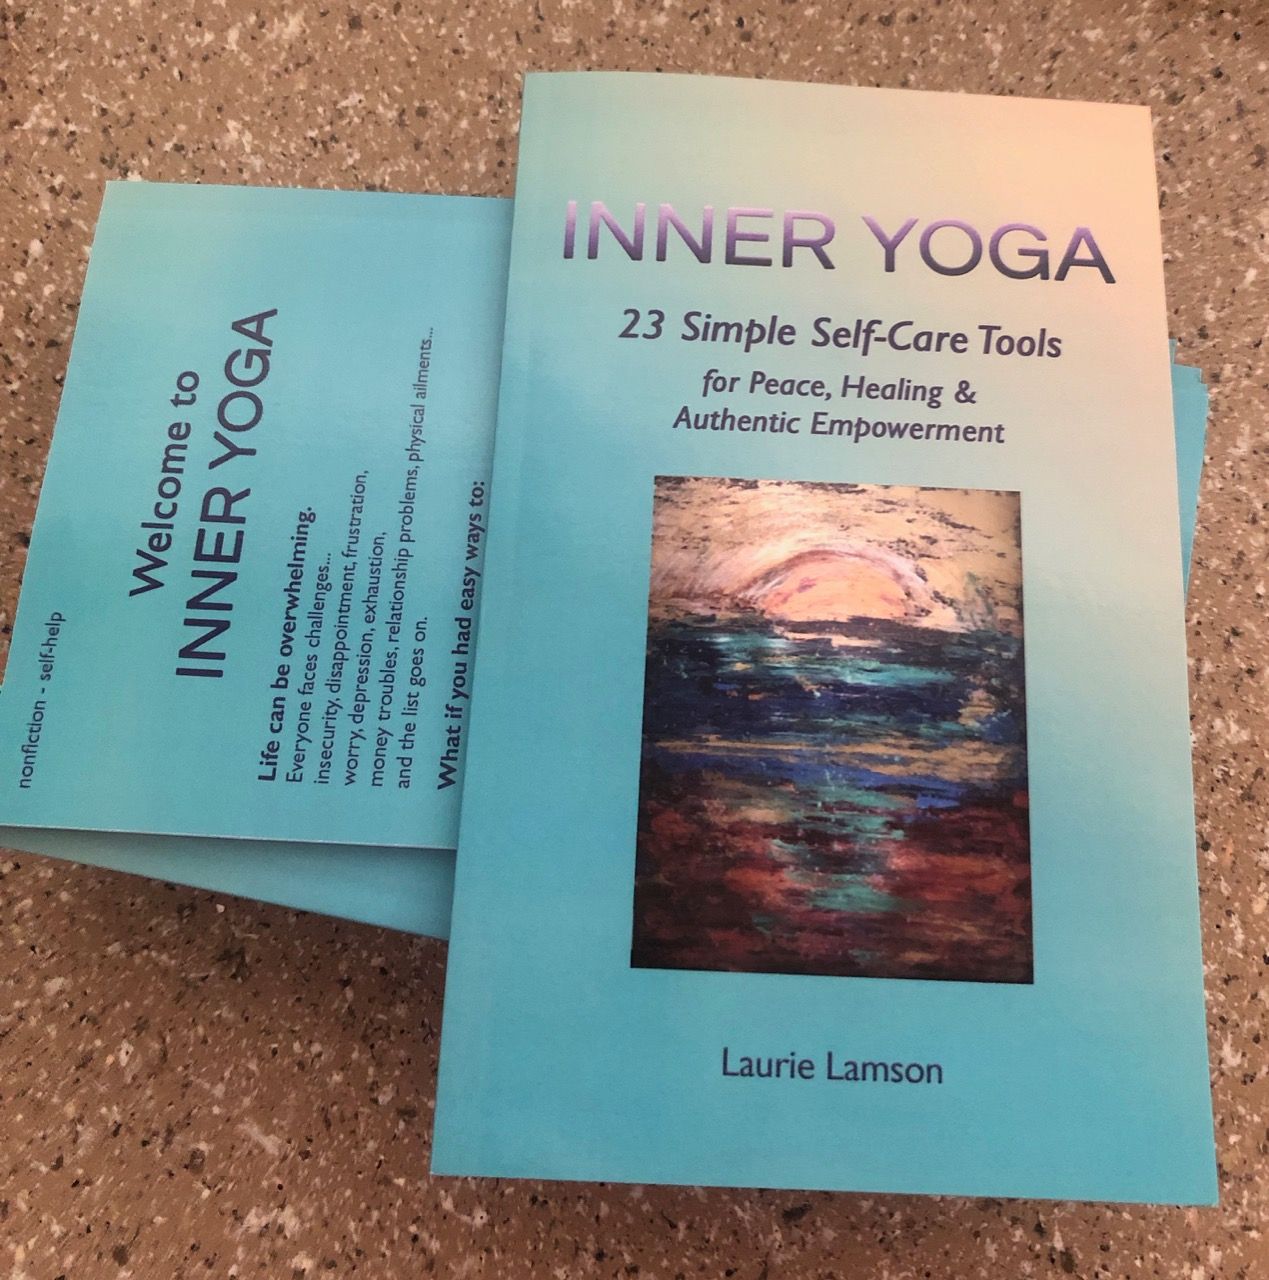 INNER YOGA: 23 Simple Self-Care Tools for Peace, Healing and Authentic Empowerment